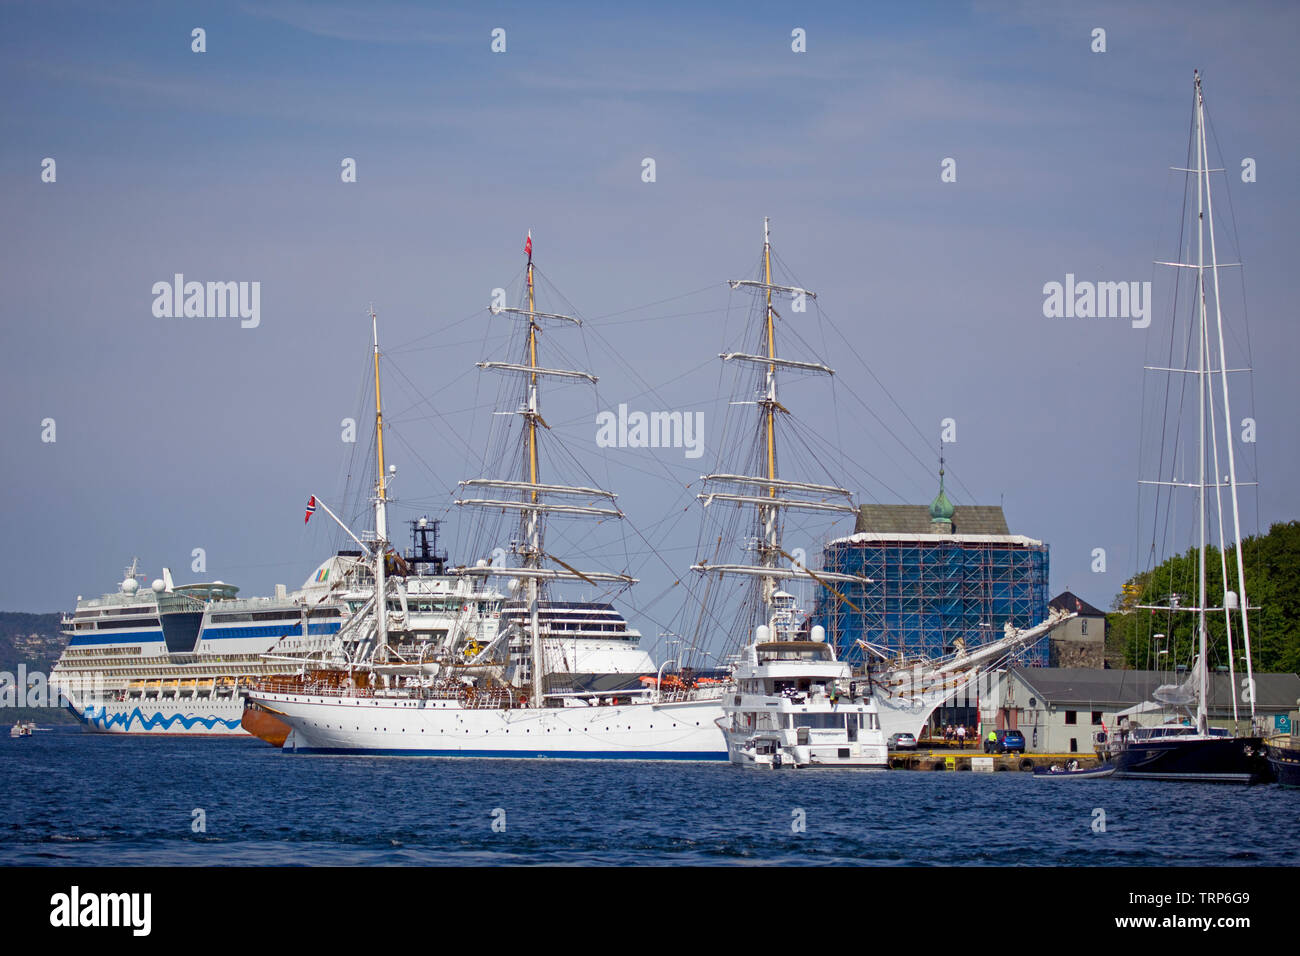 Boats and ships in Vagen harbour Bergen, Norway Stock Photo